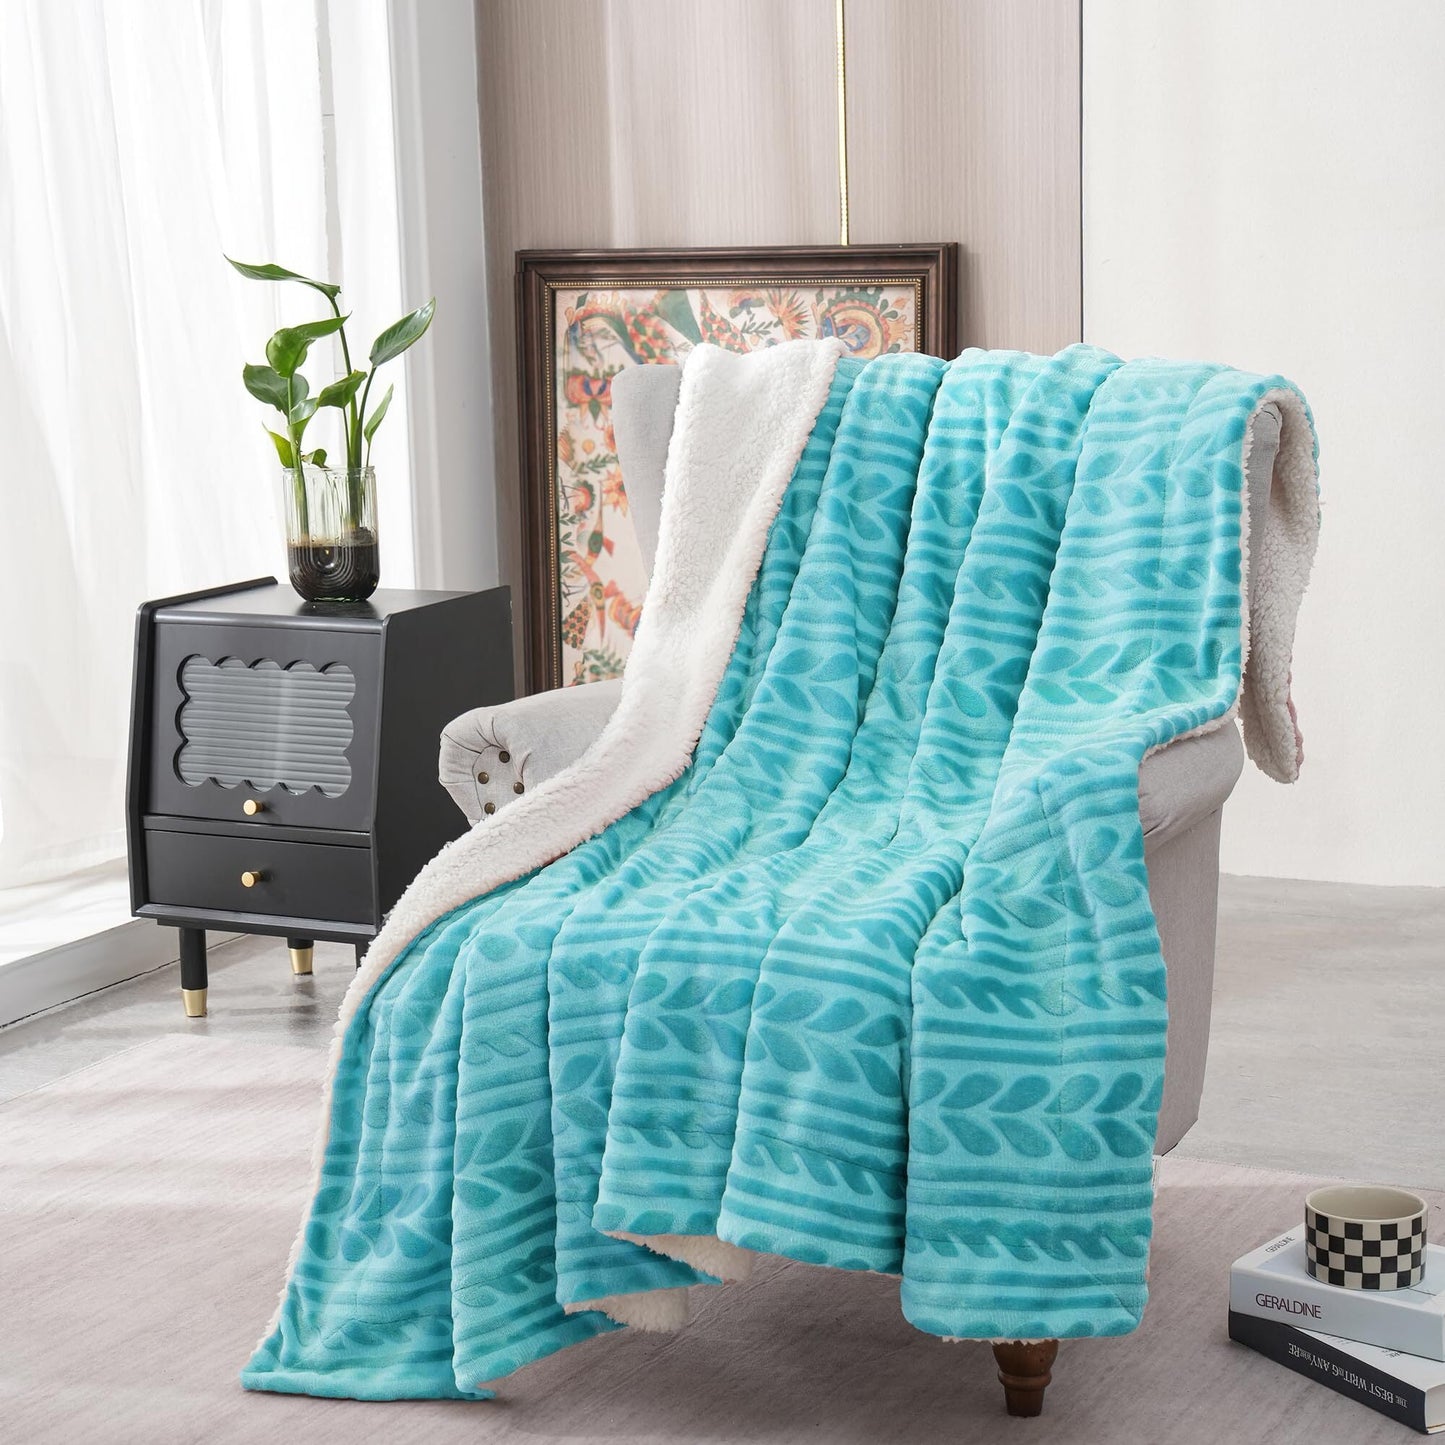 Exclusivo Mezcla 50"x70" Sherpa Fleece Throw Blanket, Reversible Velvet Plush Blankets and Soft Throws for Couch, Sofa, Bed, Super Cozy Thick and Warm, Aqua Blue